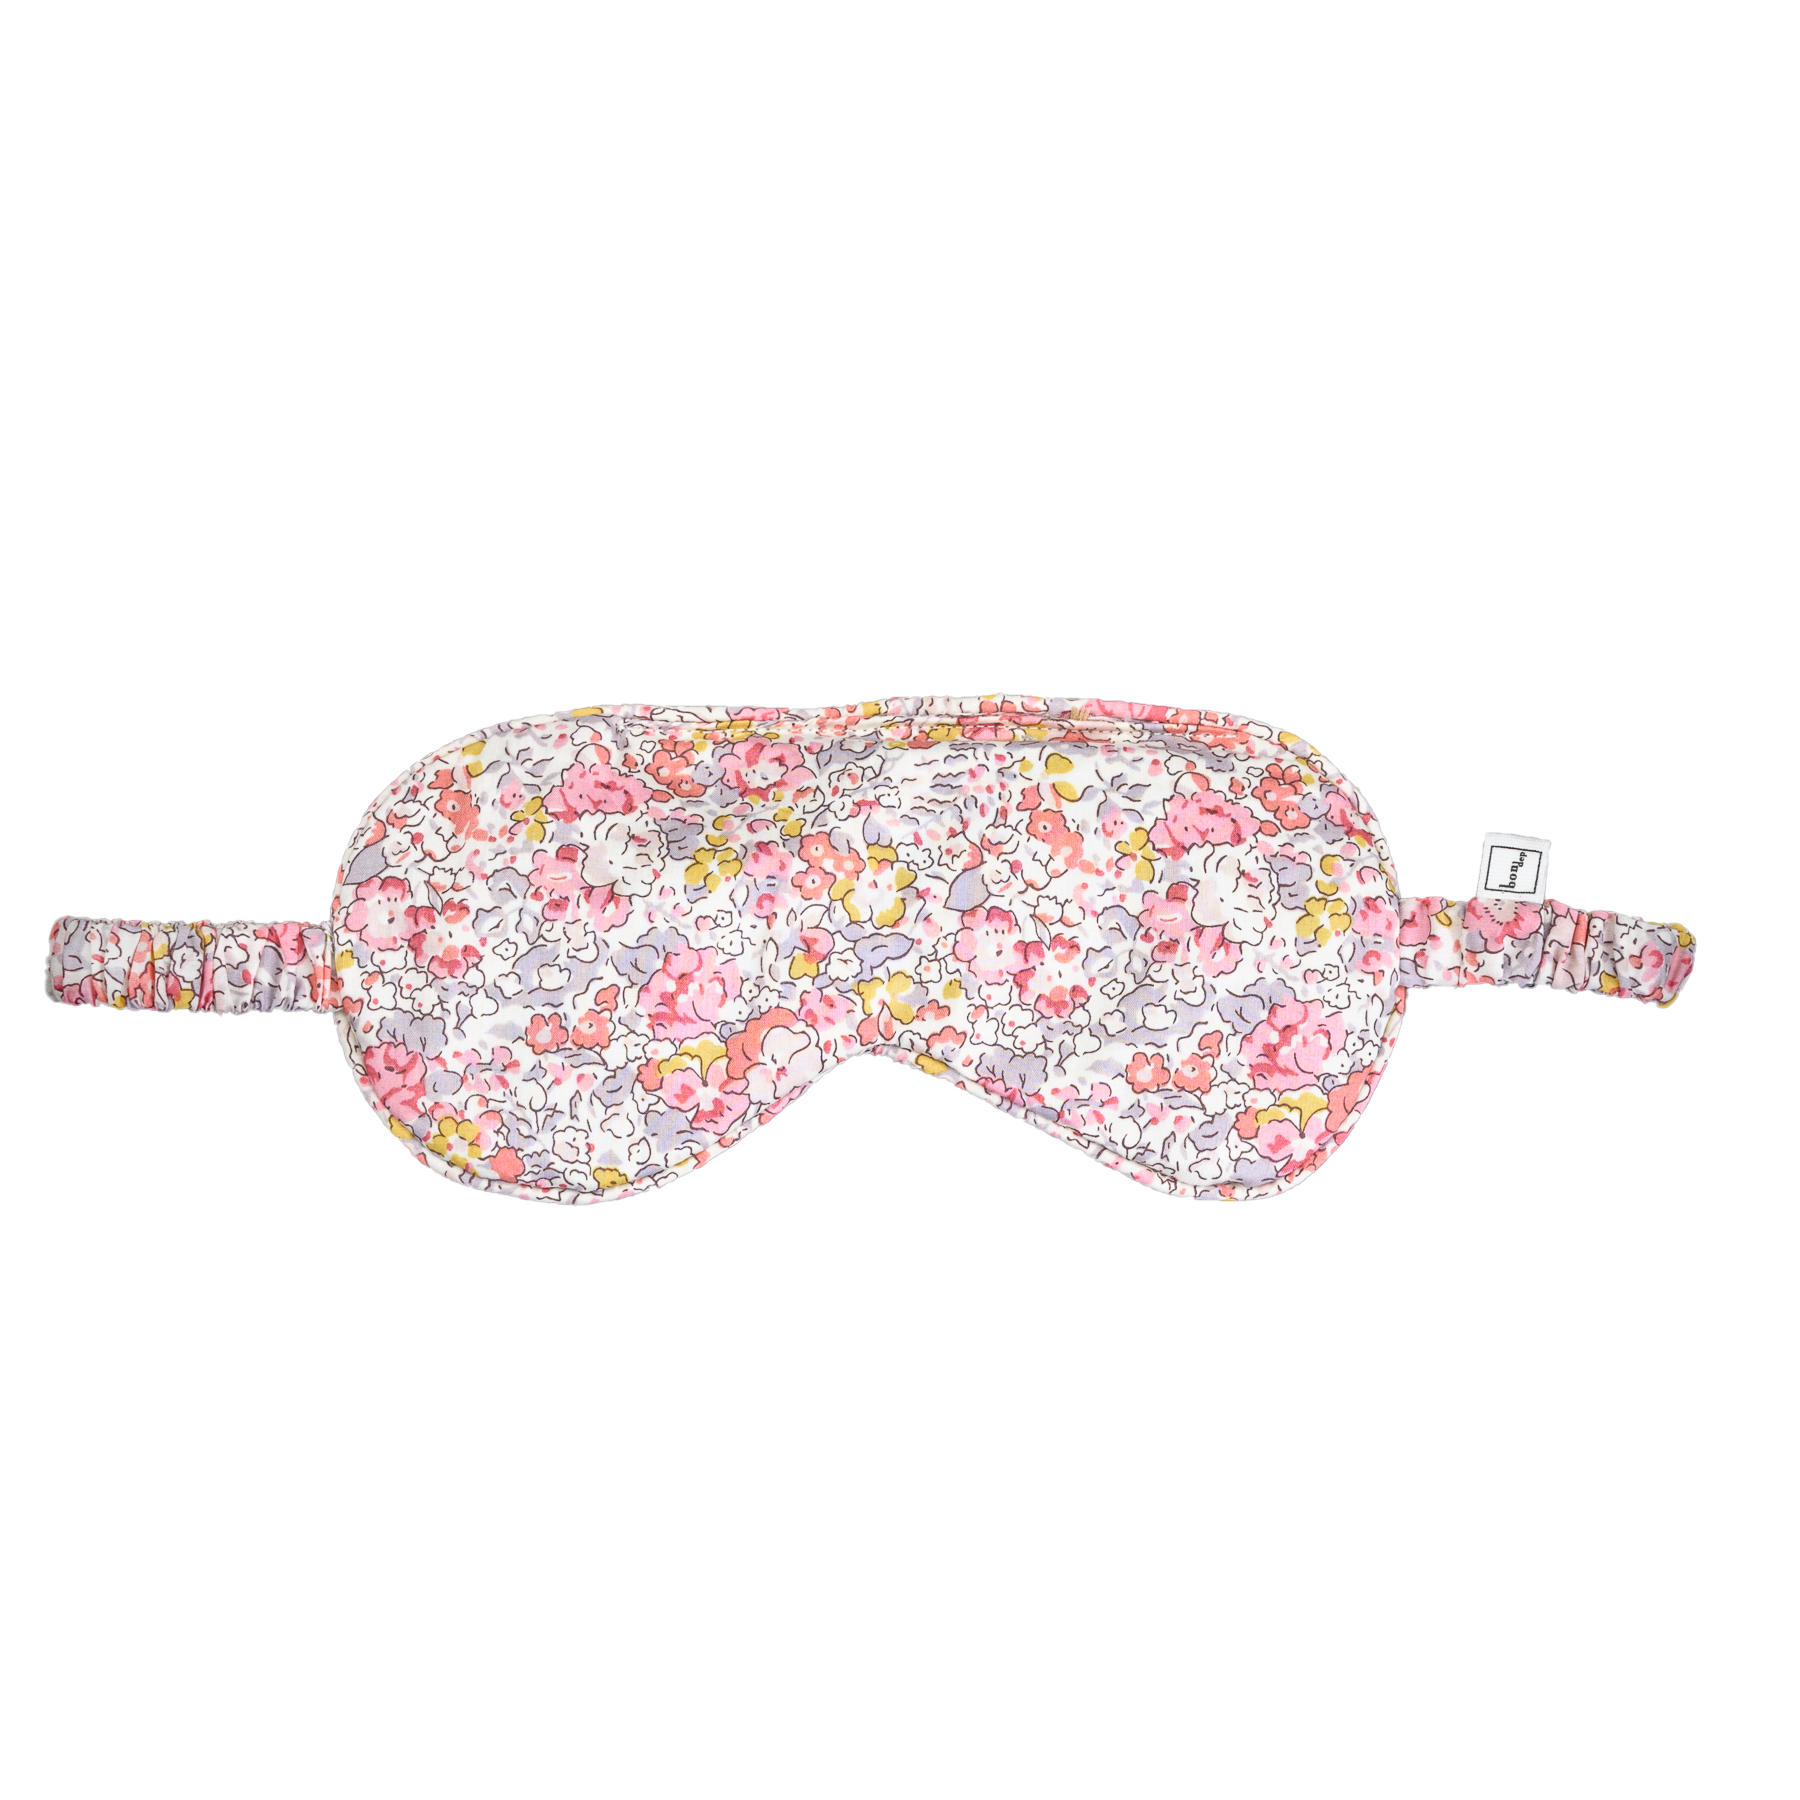 Image of Eye masks mw Libery Claire Aude organic from Bon Dep Essentials